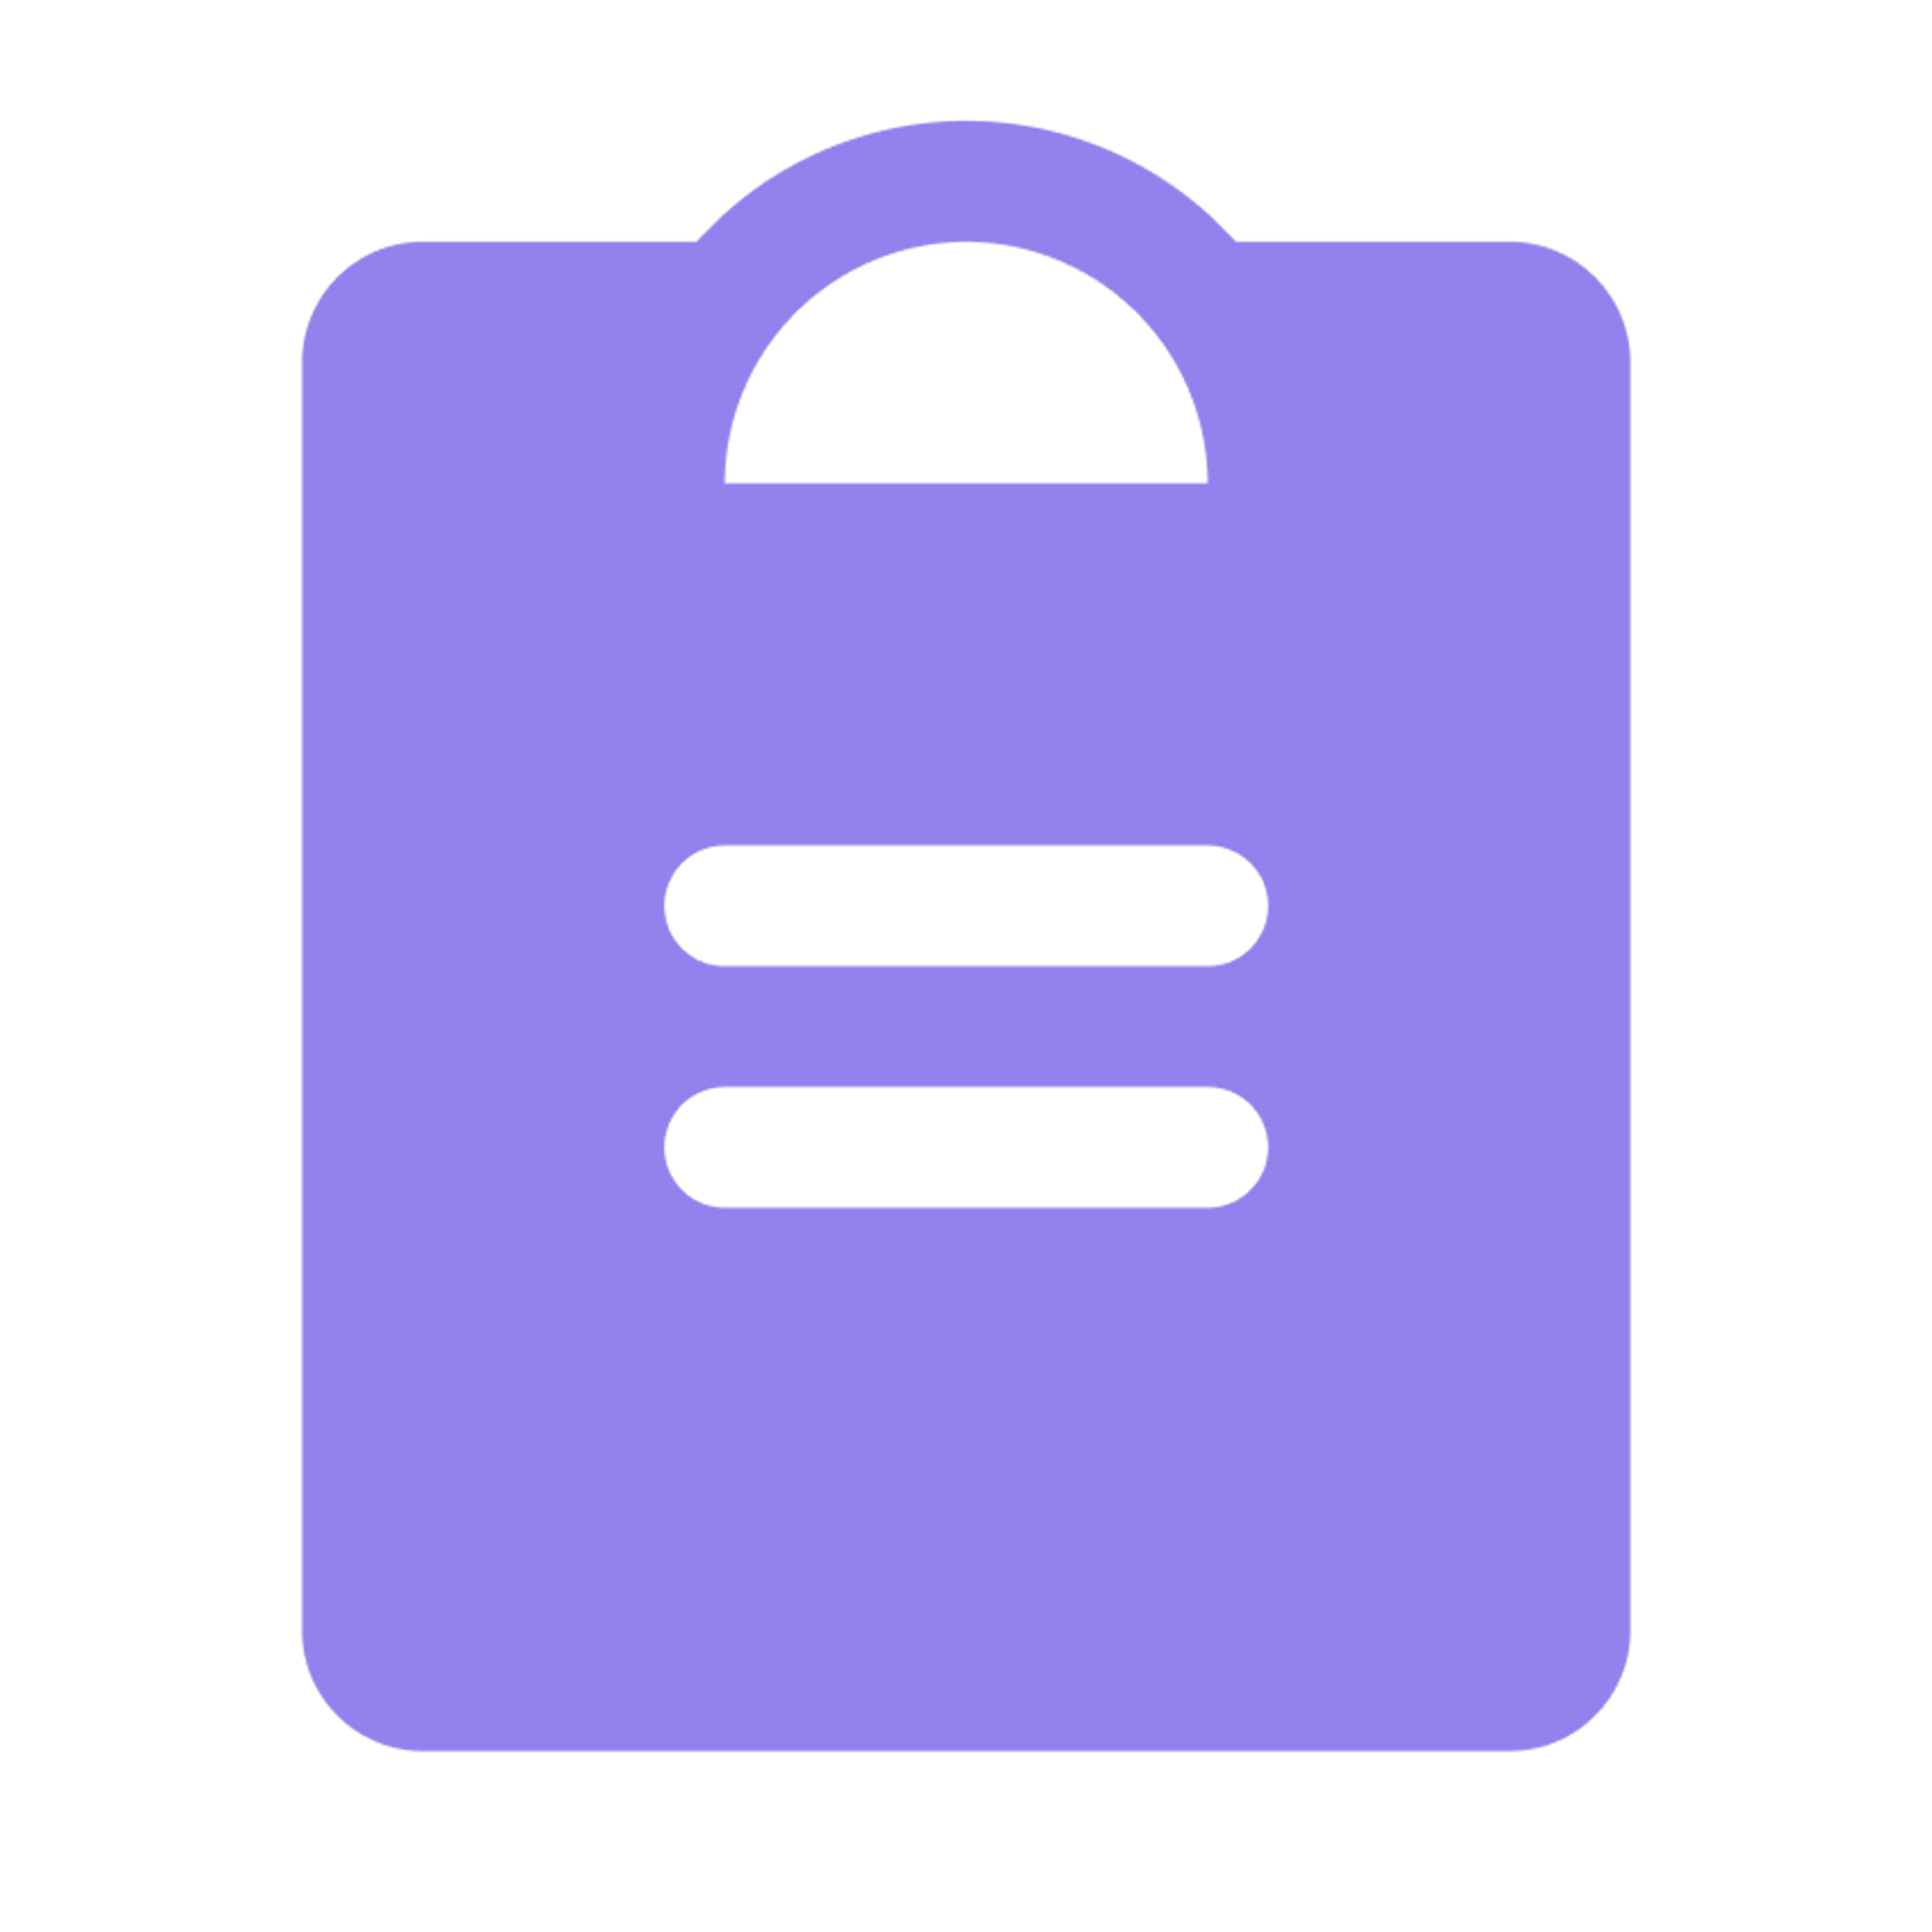 A purple icon of a clipboard on a transparent background